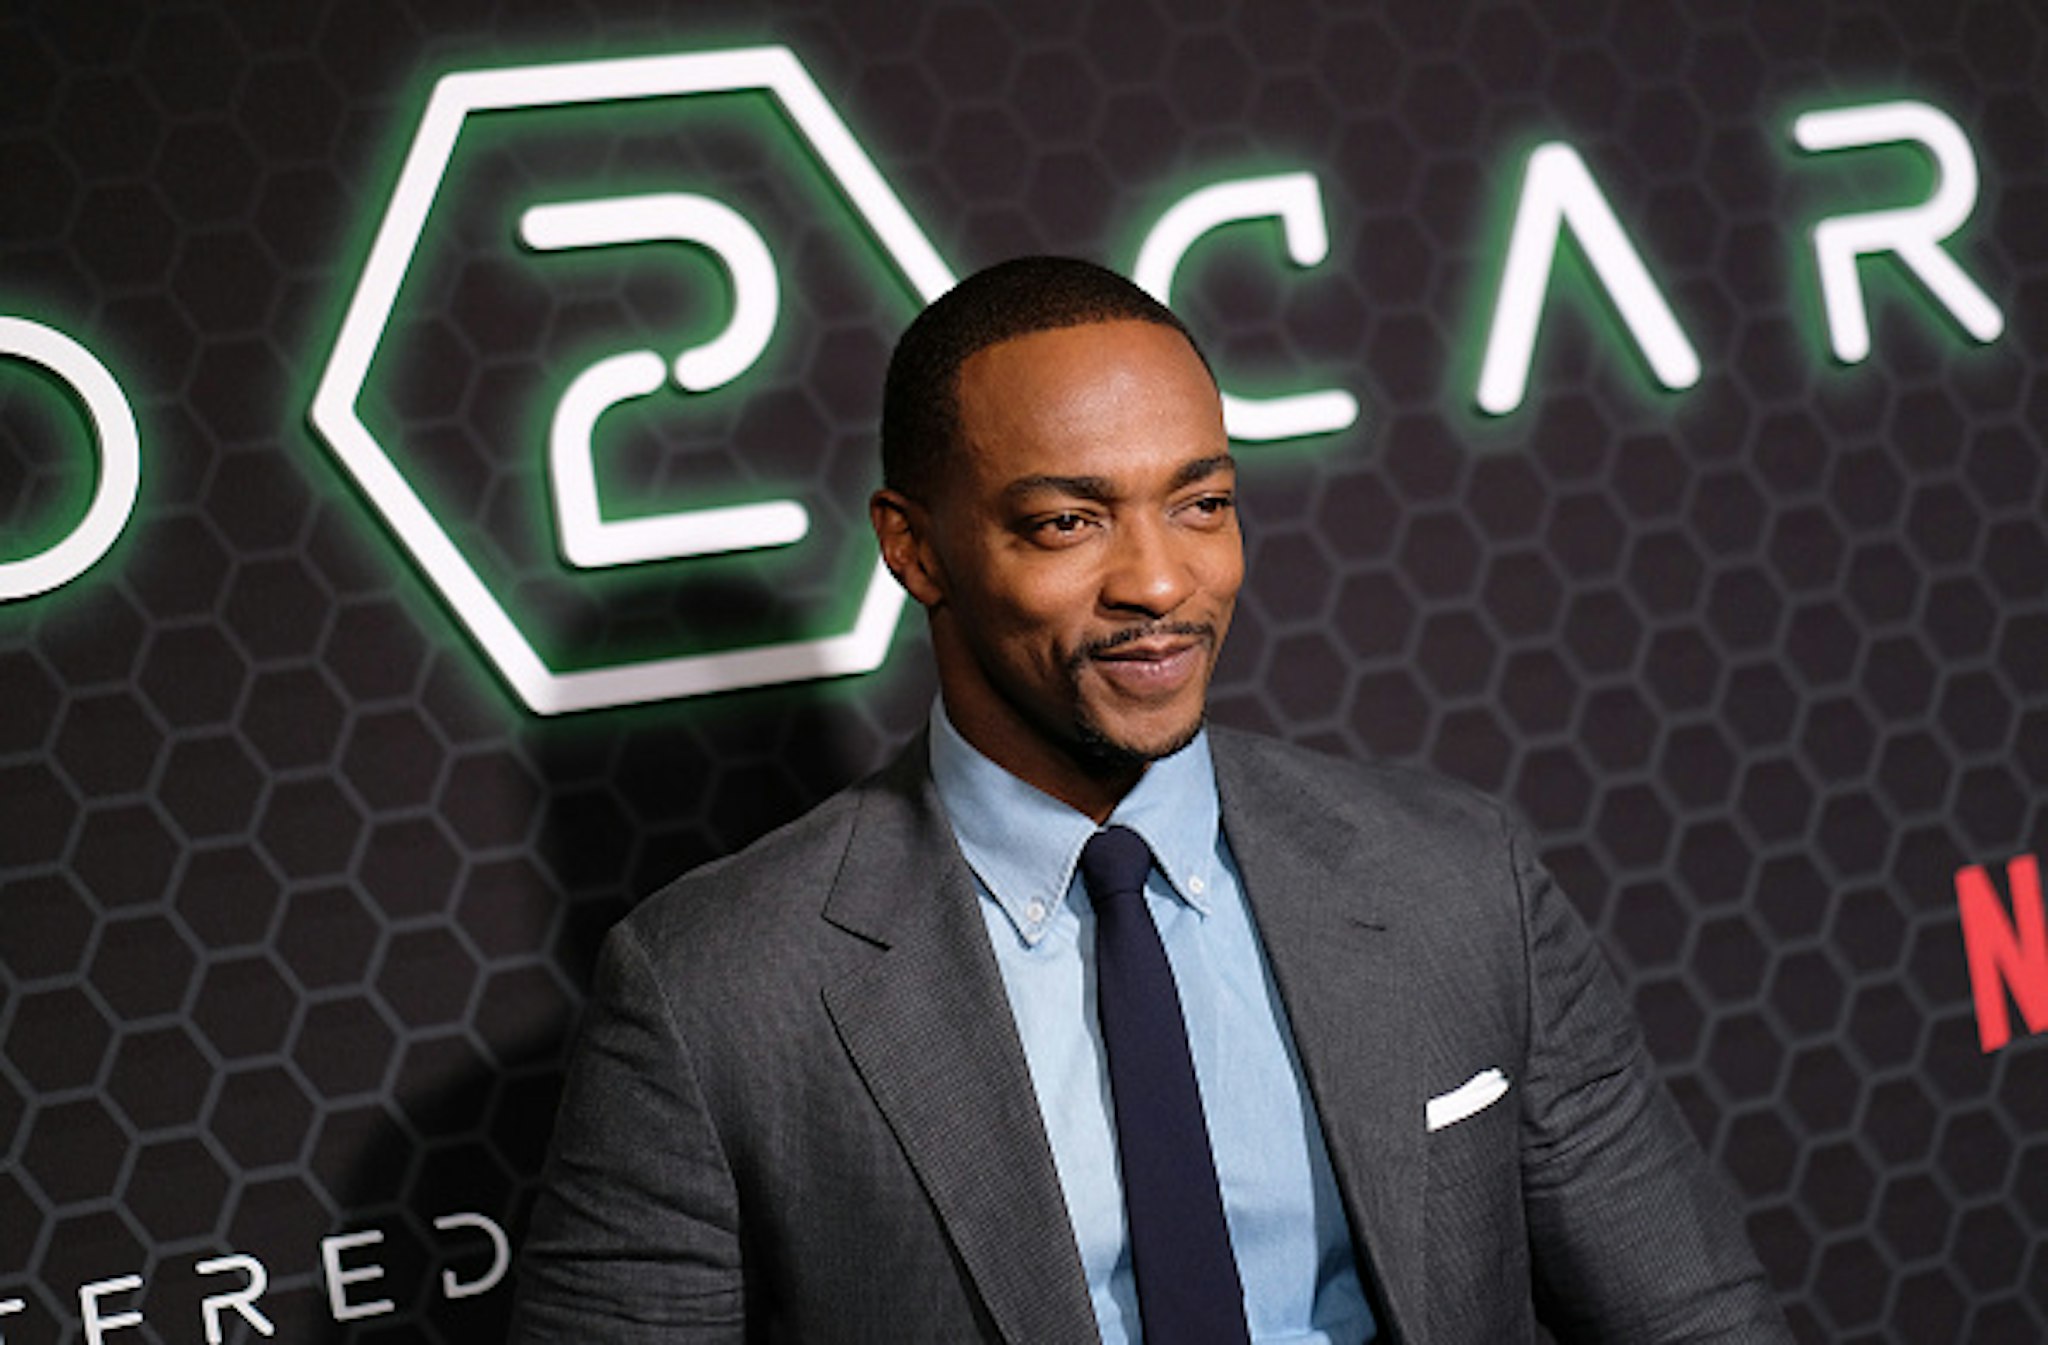 NEW YORK, NEW YORK - FEBRUARY 24: Anthony Mackie attends Netflix's "Altered Carbon" Season 2 Photo Call at AMC Lincoln Square Theater on February 24, 2020 in New York City.